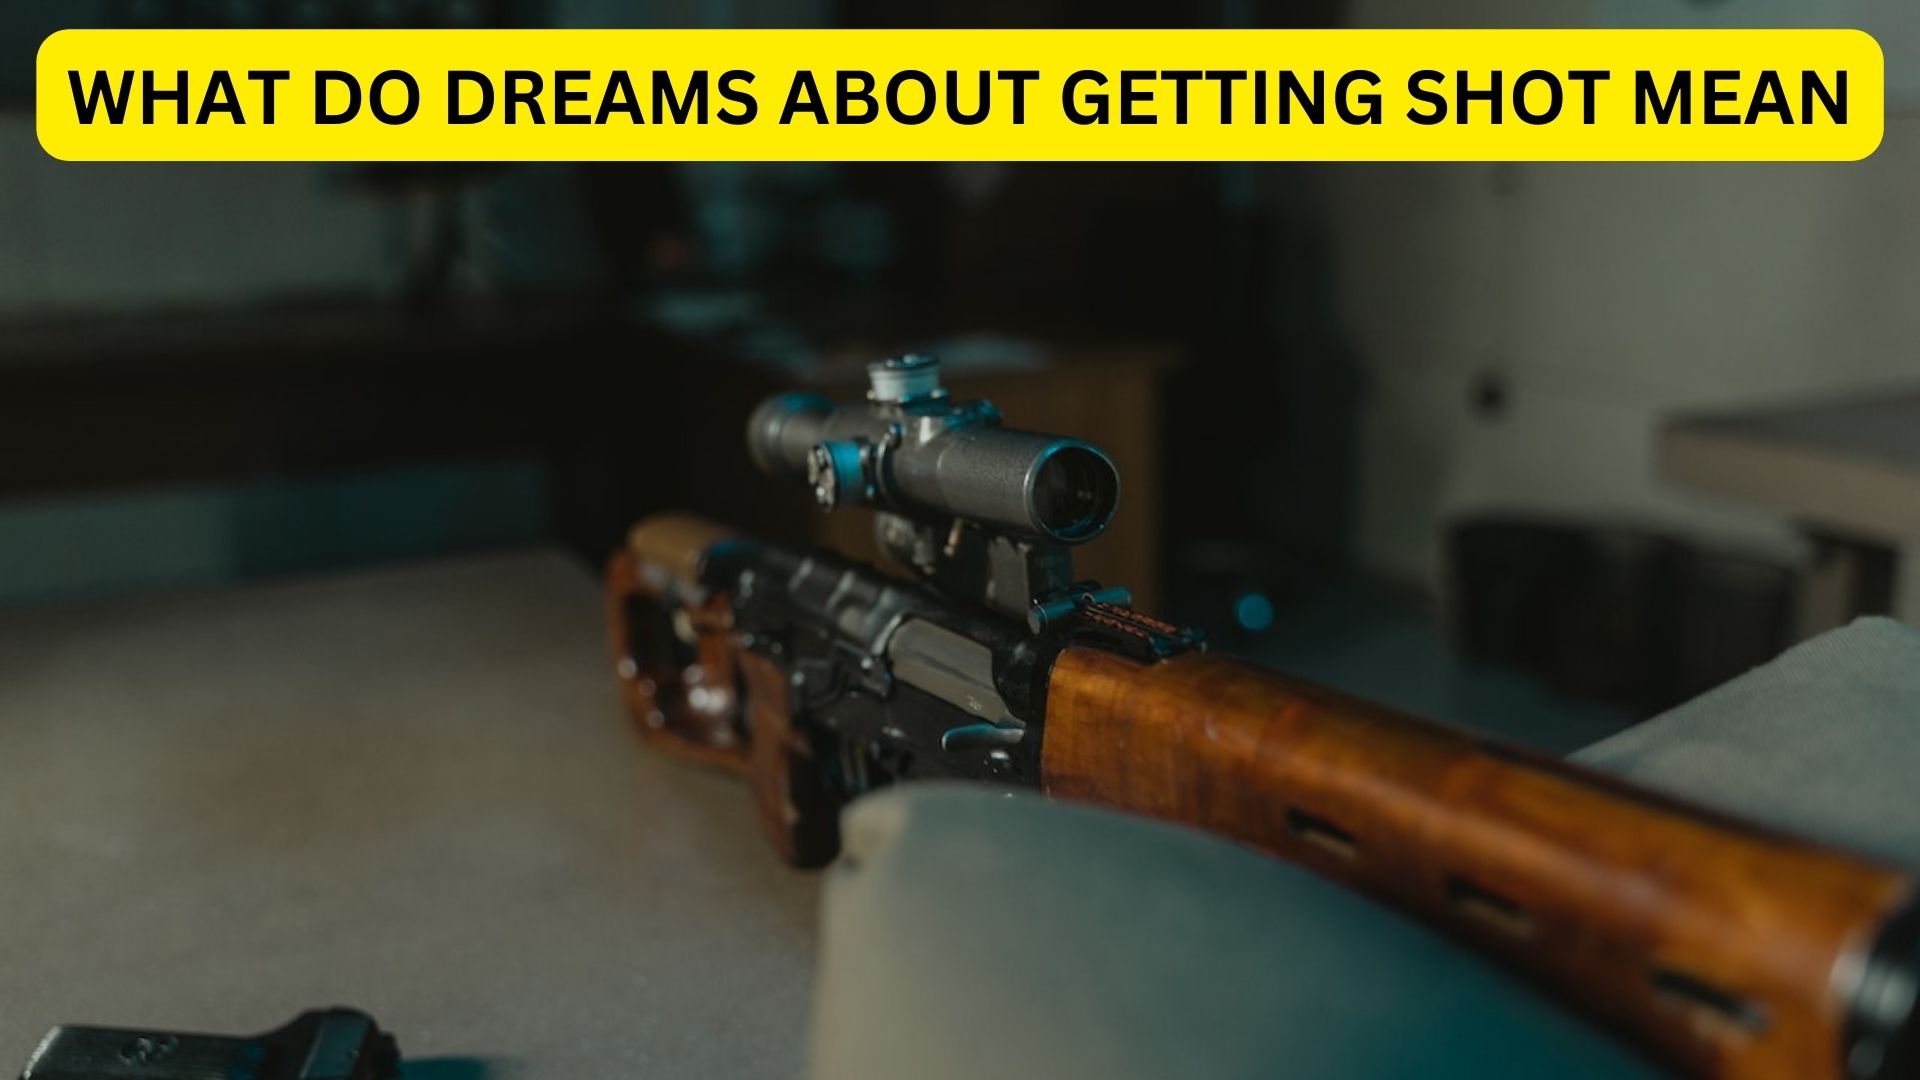 What Do Dreams About Getting Shot Mean?